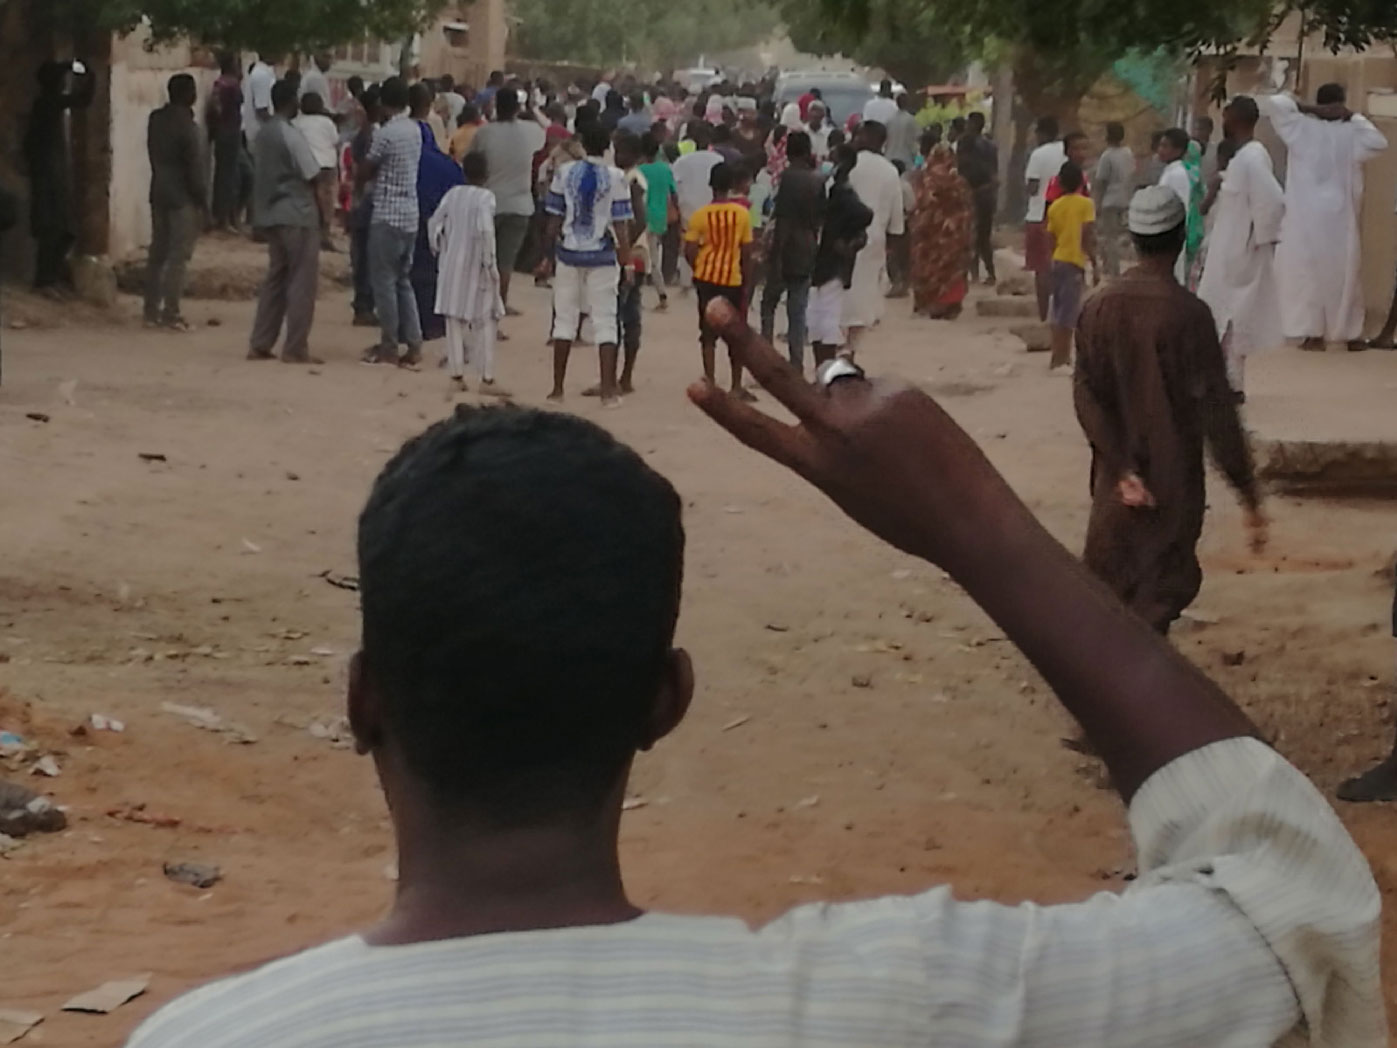 A Sudanese protester raises the victory sign during an anti-government demonstration in Khartoum on February 15, 2019.